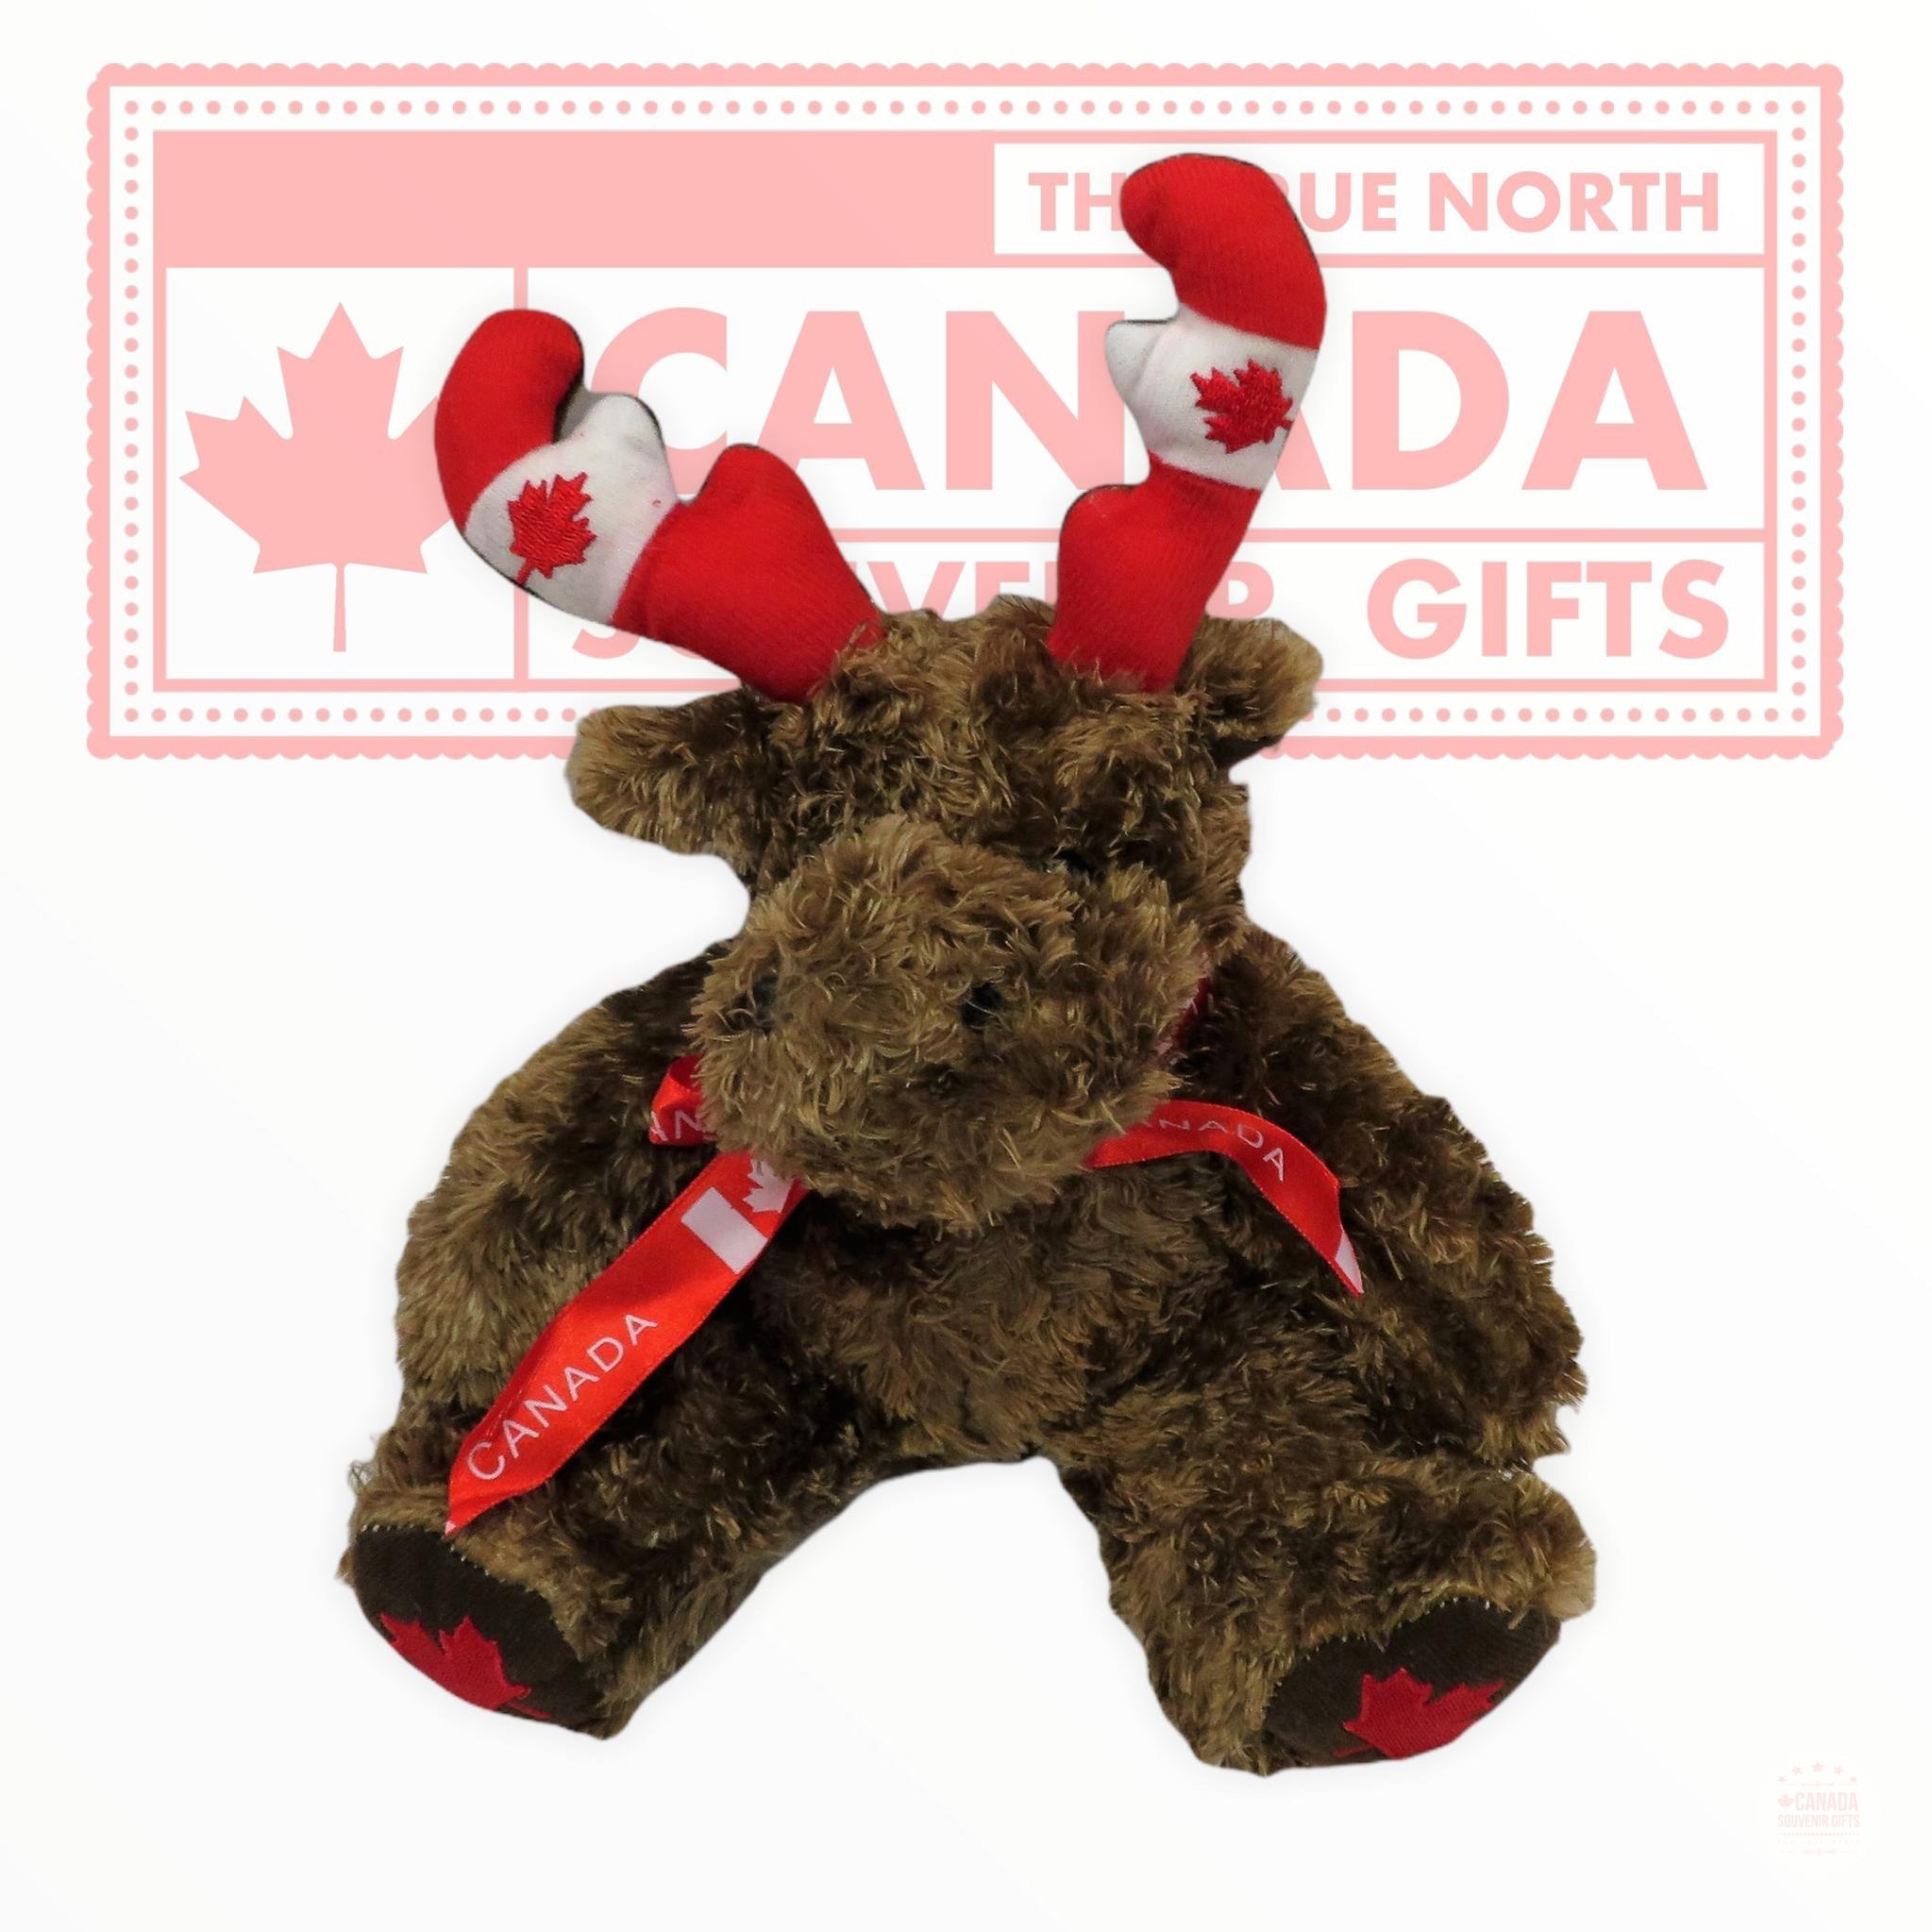 Canada Country Flag Plush Moose Toy Premium Quality Gift for your Loved Ones on any occasion